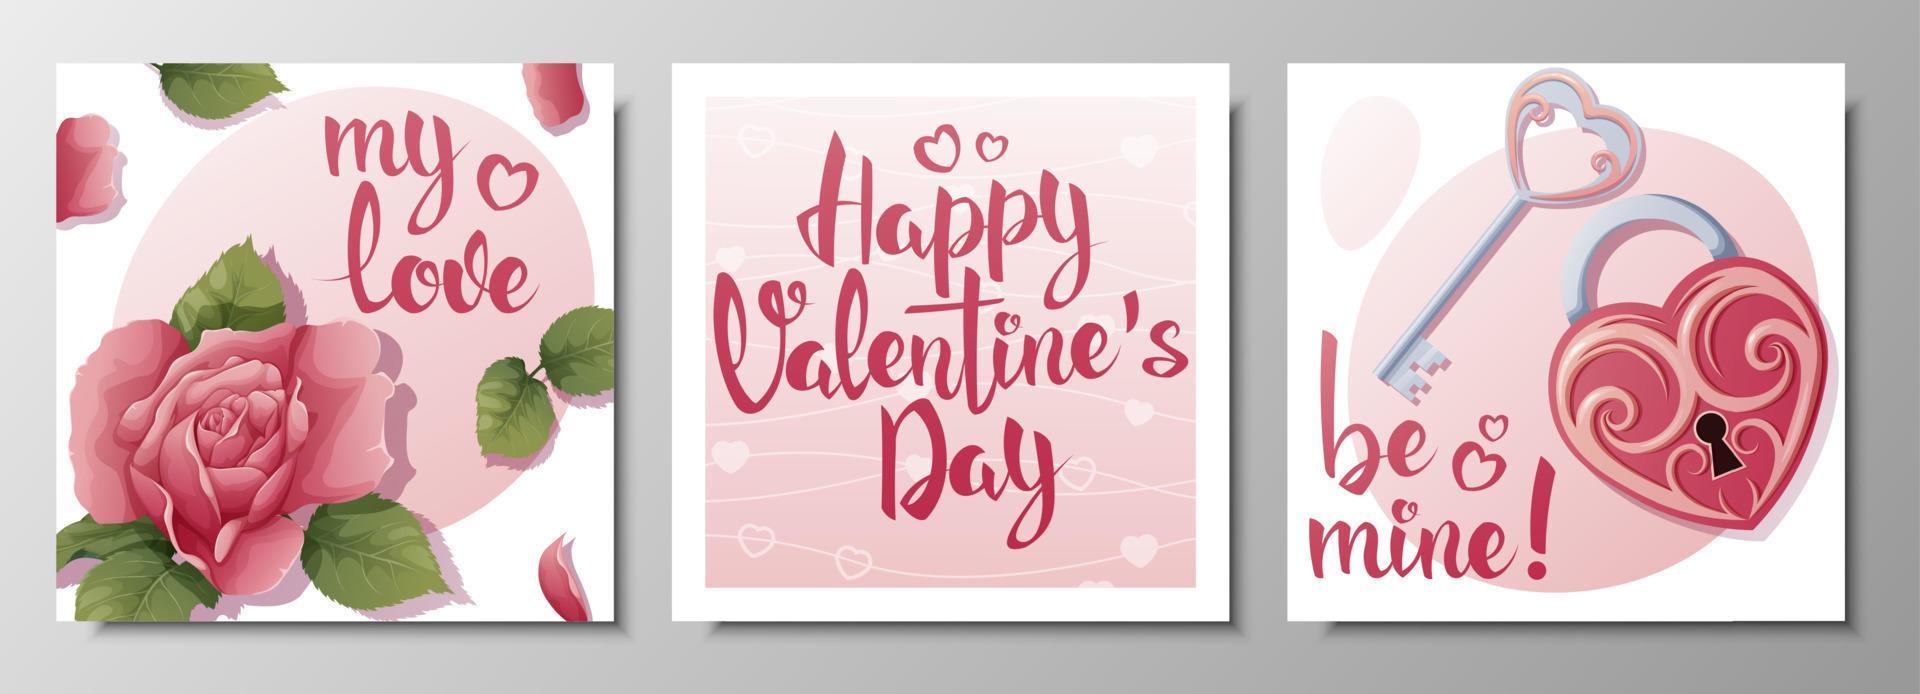 Set of square greeting cards for Valentine s day. A rose, a heart-shaped lock. Poster, banner, flyer with handwritten congratulations. vector